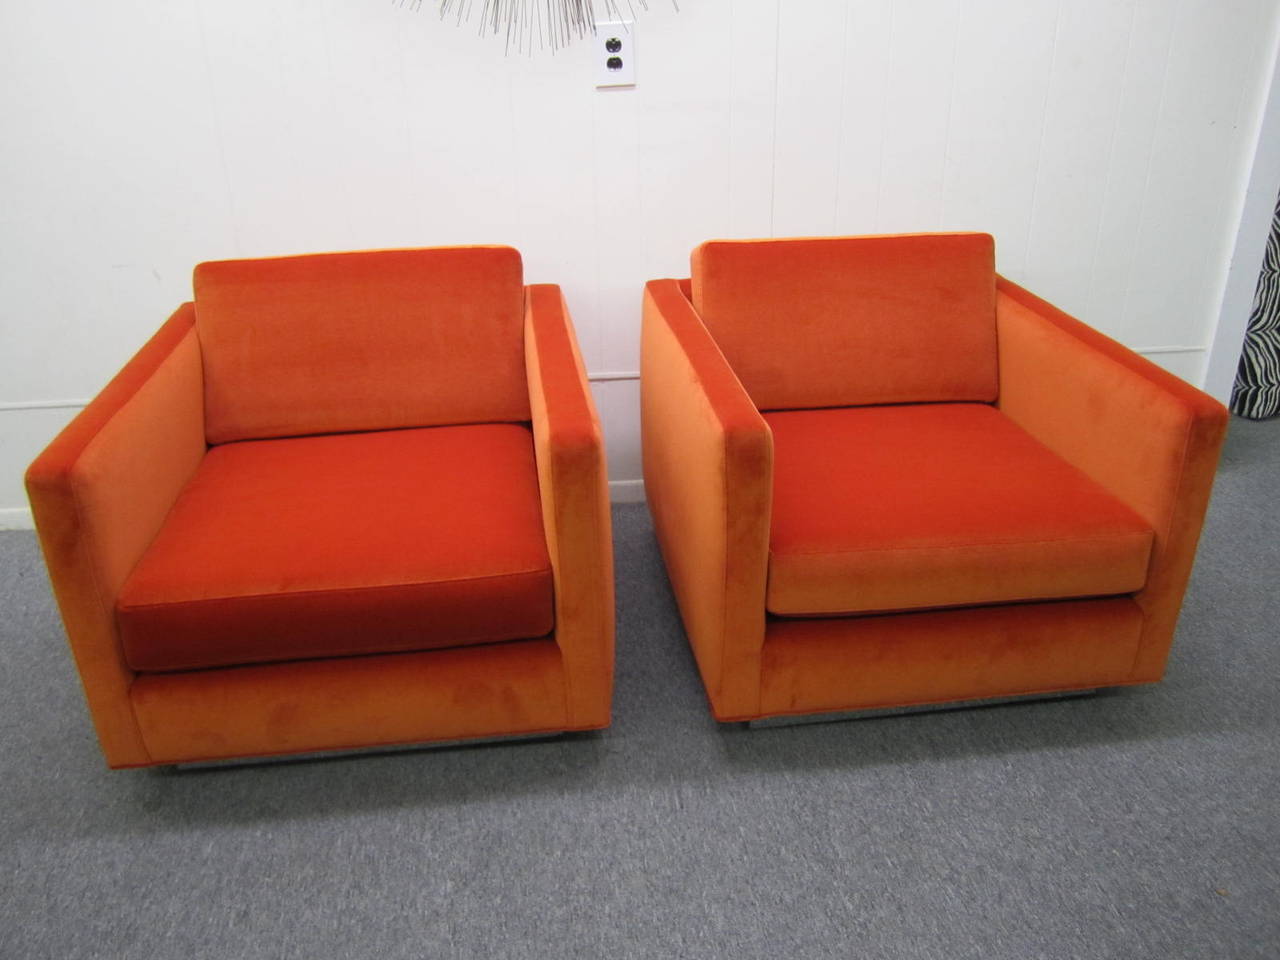 Excellent pair of totally restored signed Milo Baughman cube lounge chairs. New high end orange velvet fabric along with new foam have gone into the restoration of these amazing chairs. The plinth bases have also been re-chromed and looks fabulous.